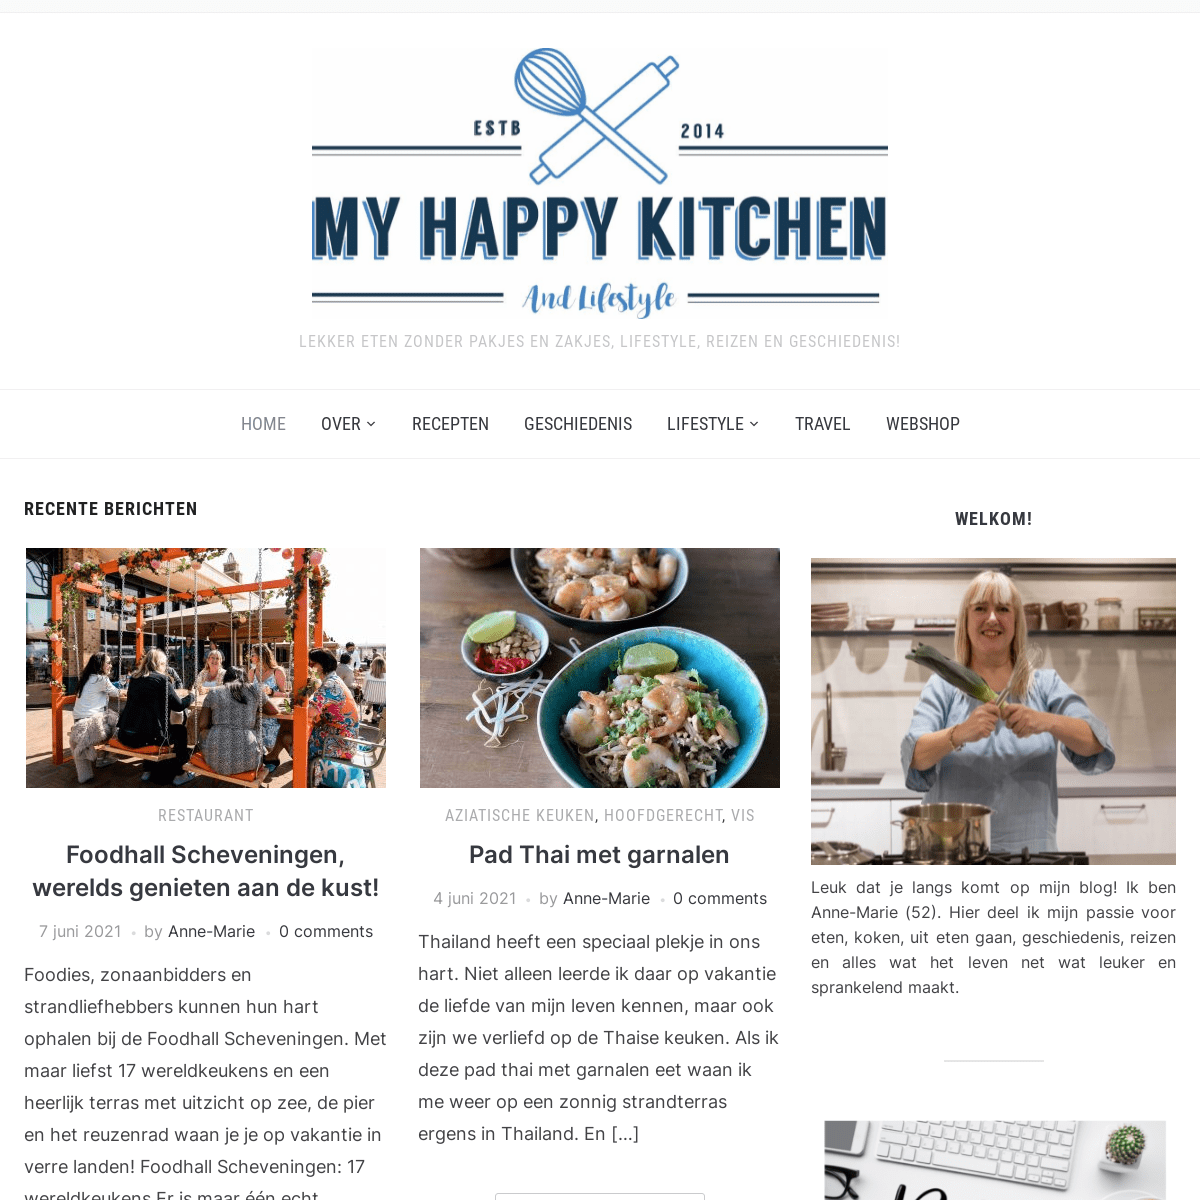 A complete backup of https://myhappykitchen.nl